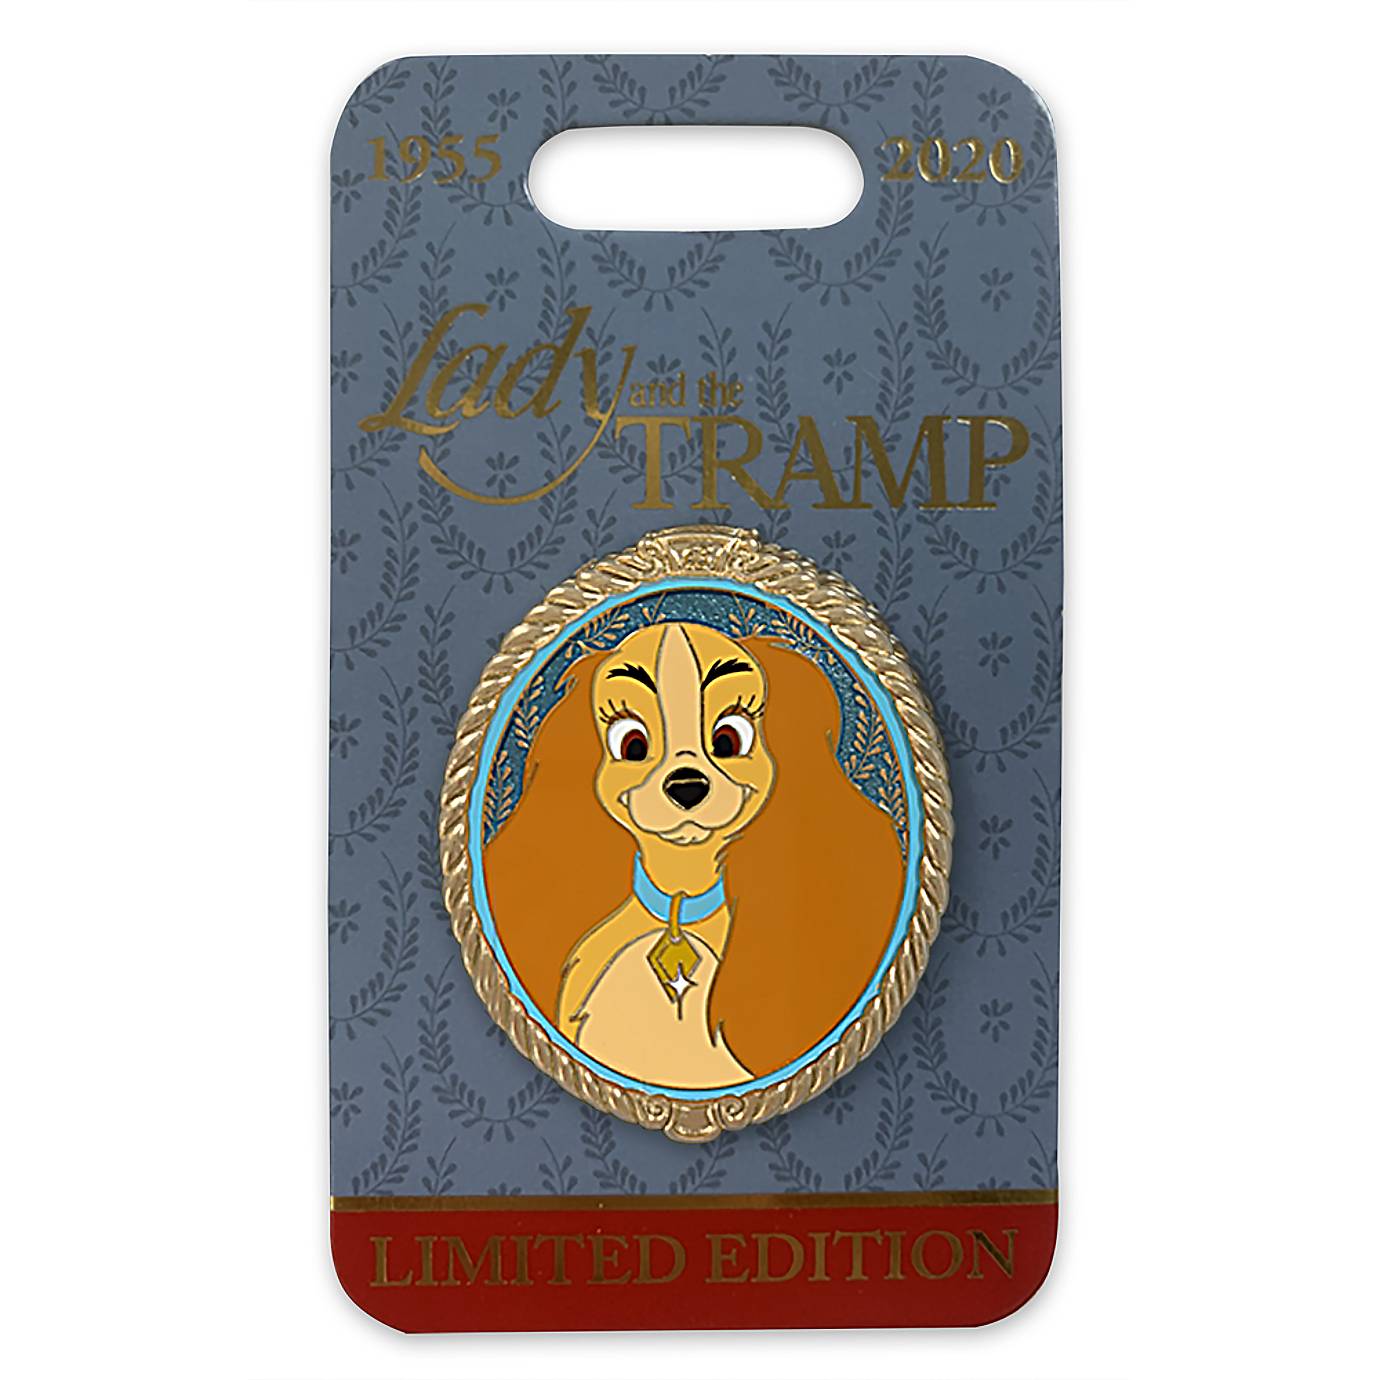 Disney Lady and the Tramp Lady Portrait Pin Limited Edition New with Card